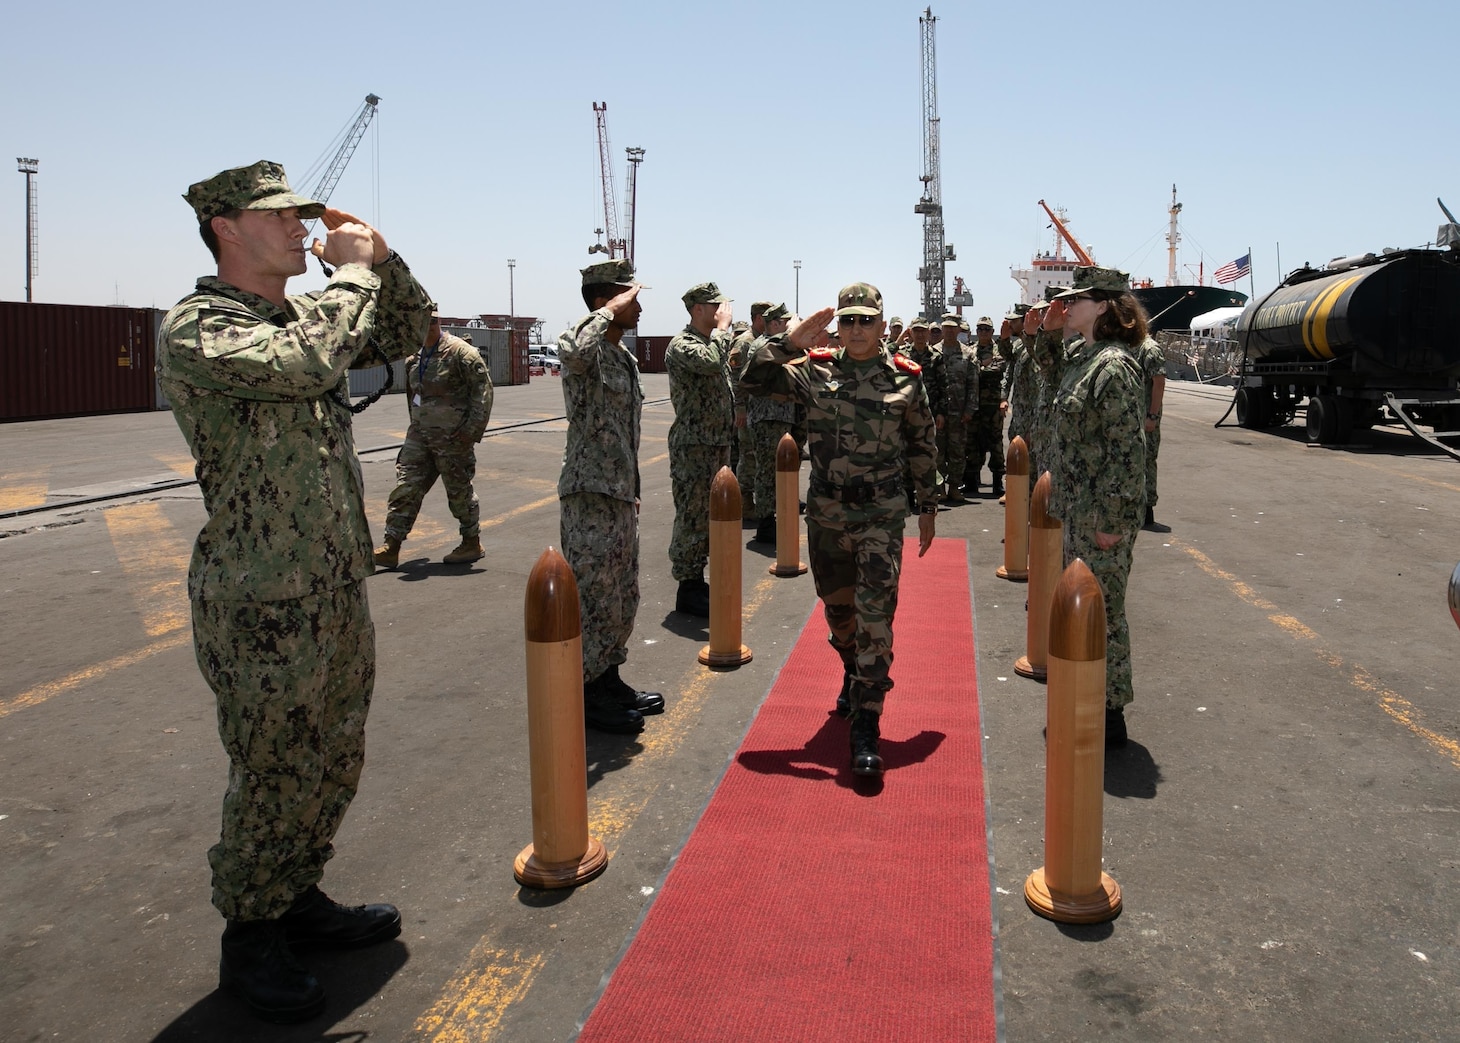 Sideboys assigned to the Arleigh Burke-class guided-missile destroyer USS Porter (DDG 78), welcome aboard Brigadier General Abdellatif Malek J2, from the Royal Moroccan Armed Forces during exercise African Lion 22, June 28, 2022.